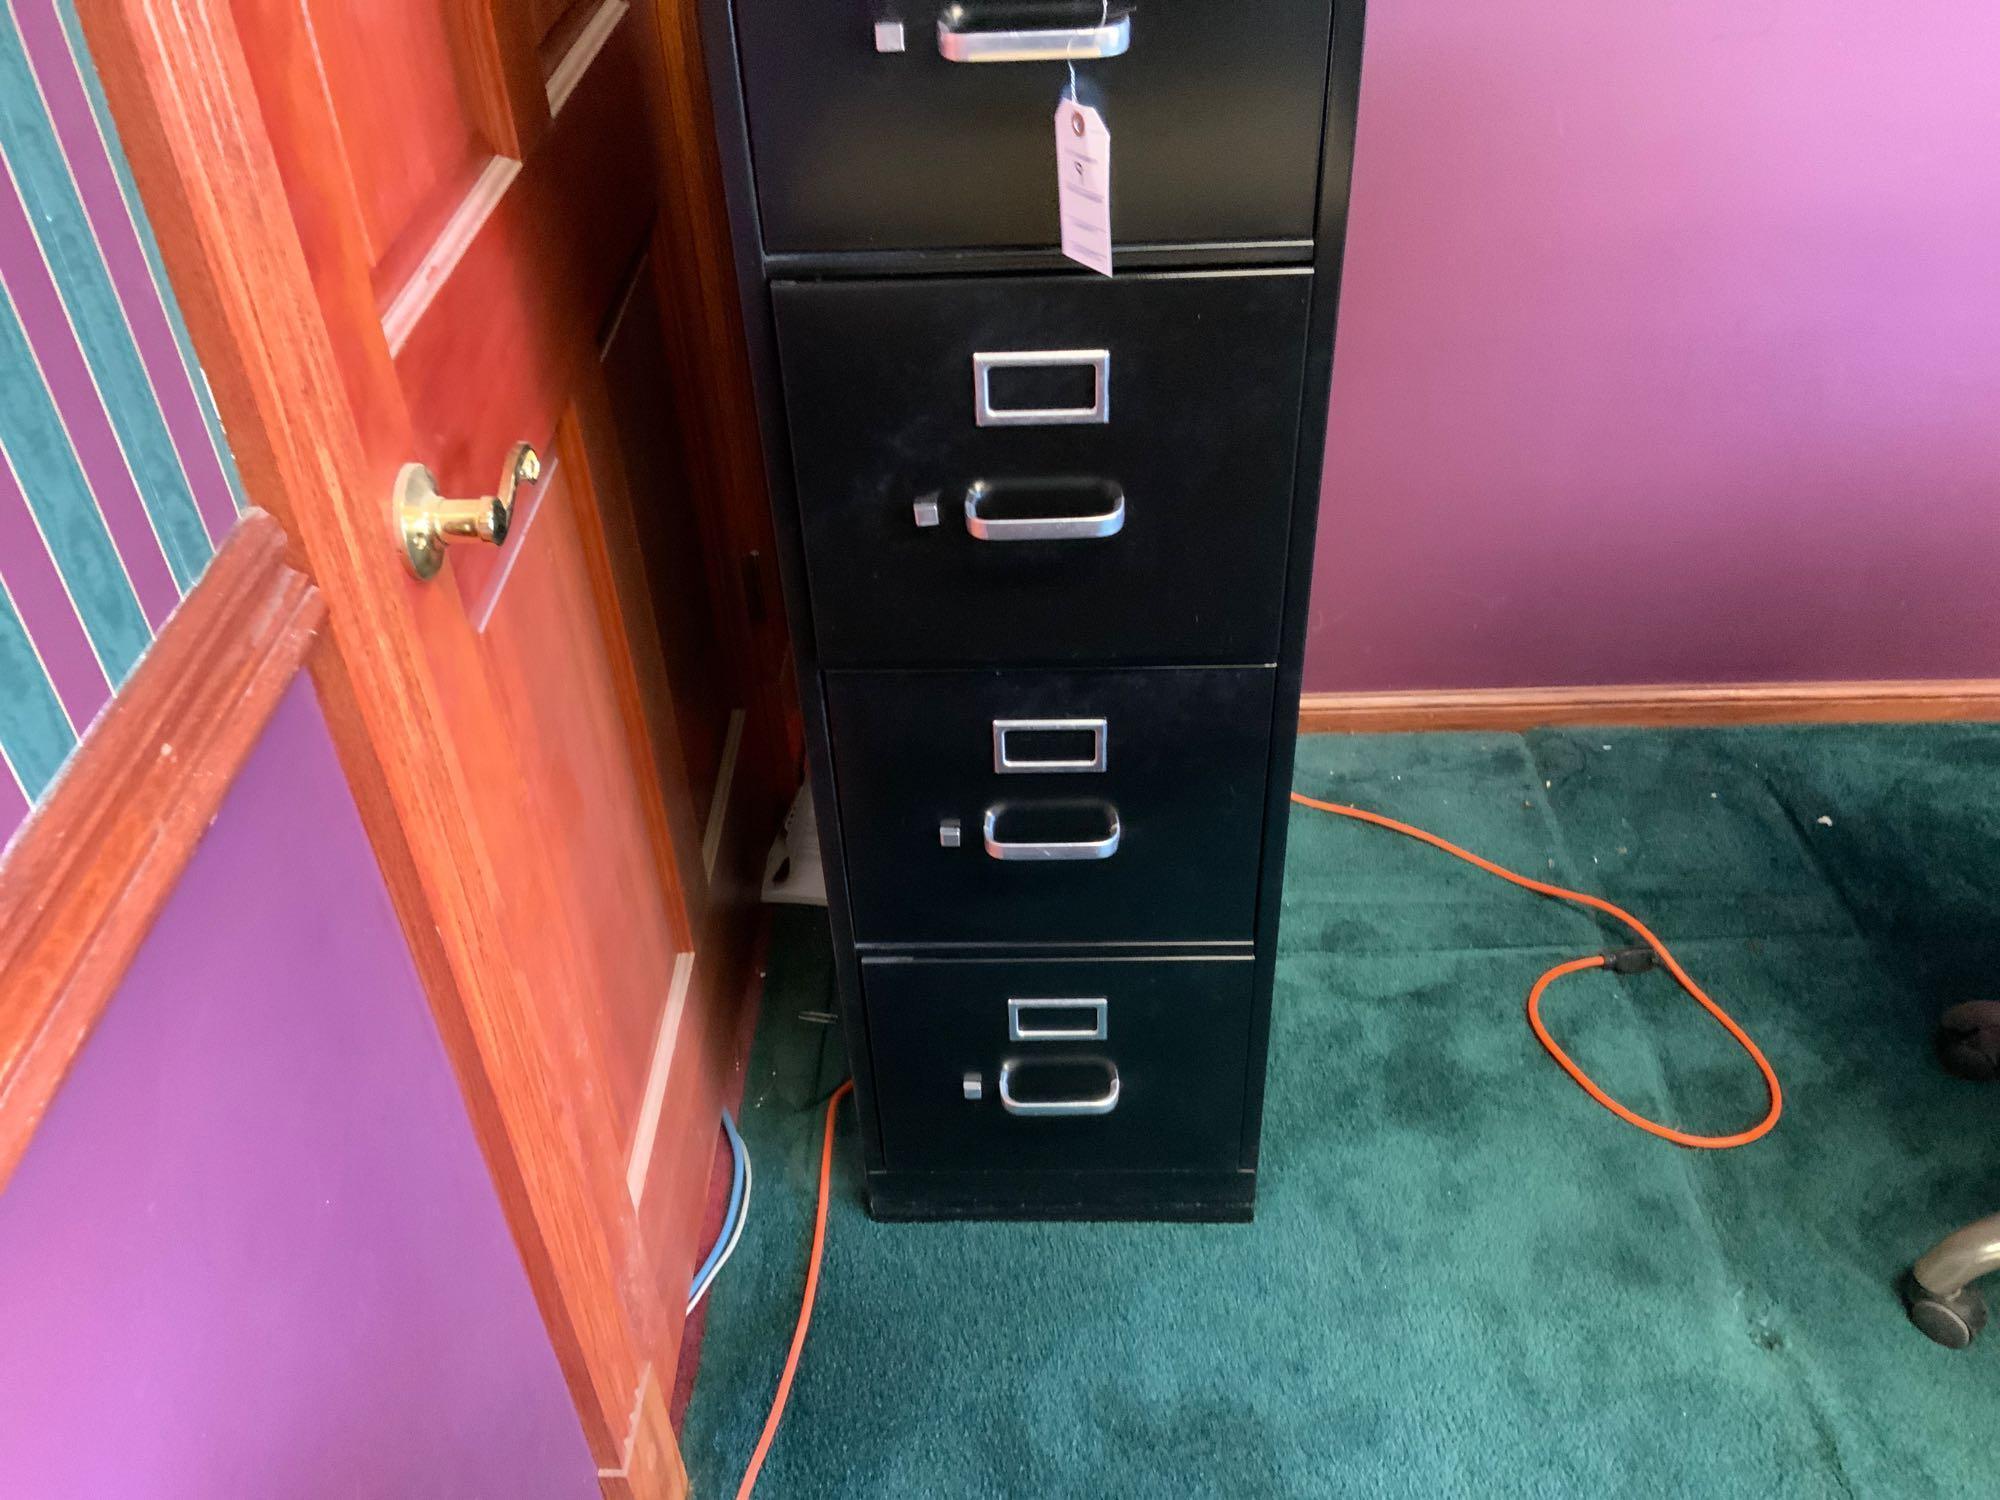 Hon four drawer metal file cabinet Pickup will be on Monday 3/29 from 1-6 pm at 1324 S. 119th